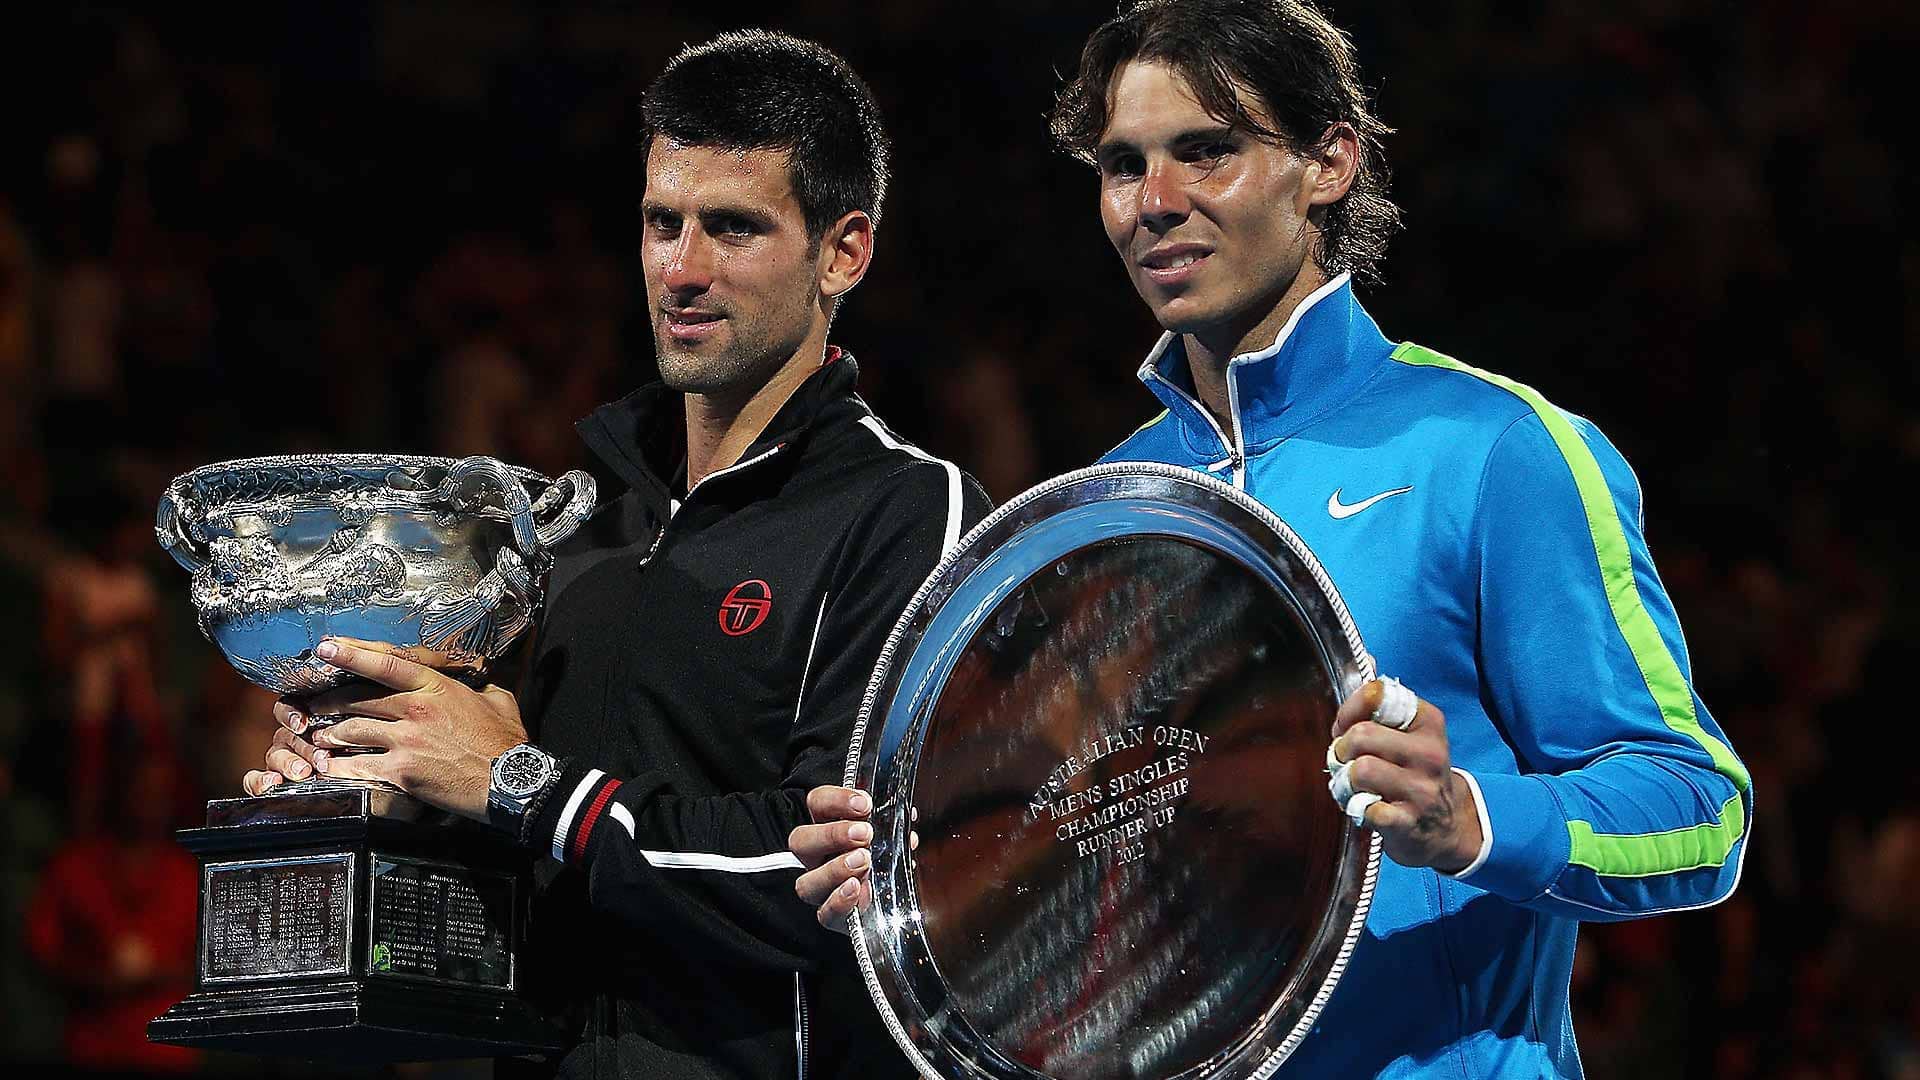 Novak Djokovic prevails in a seventh straight final meeting against Rafael Nadal at the 2012 Australian Open.